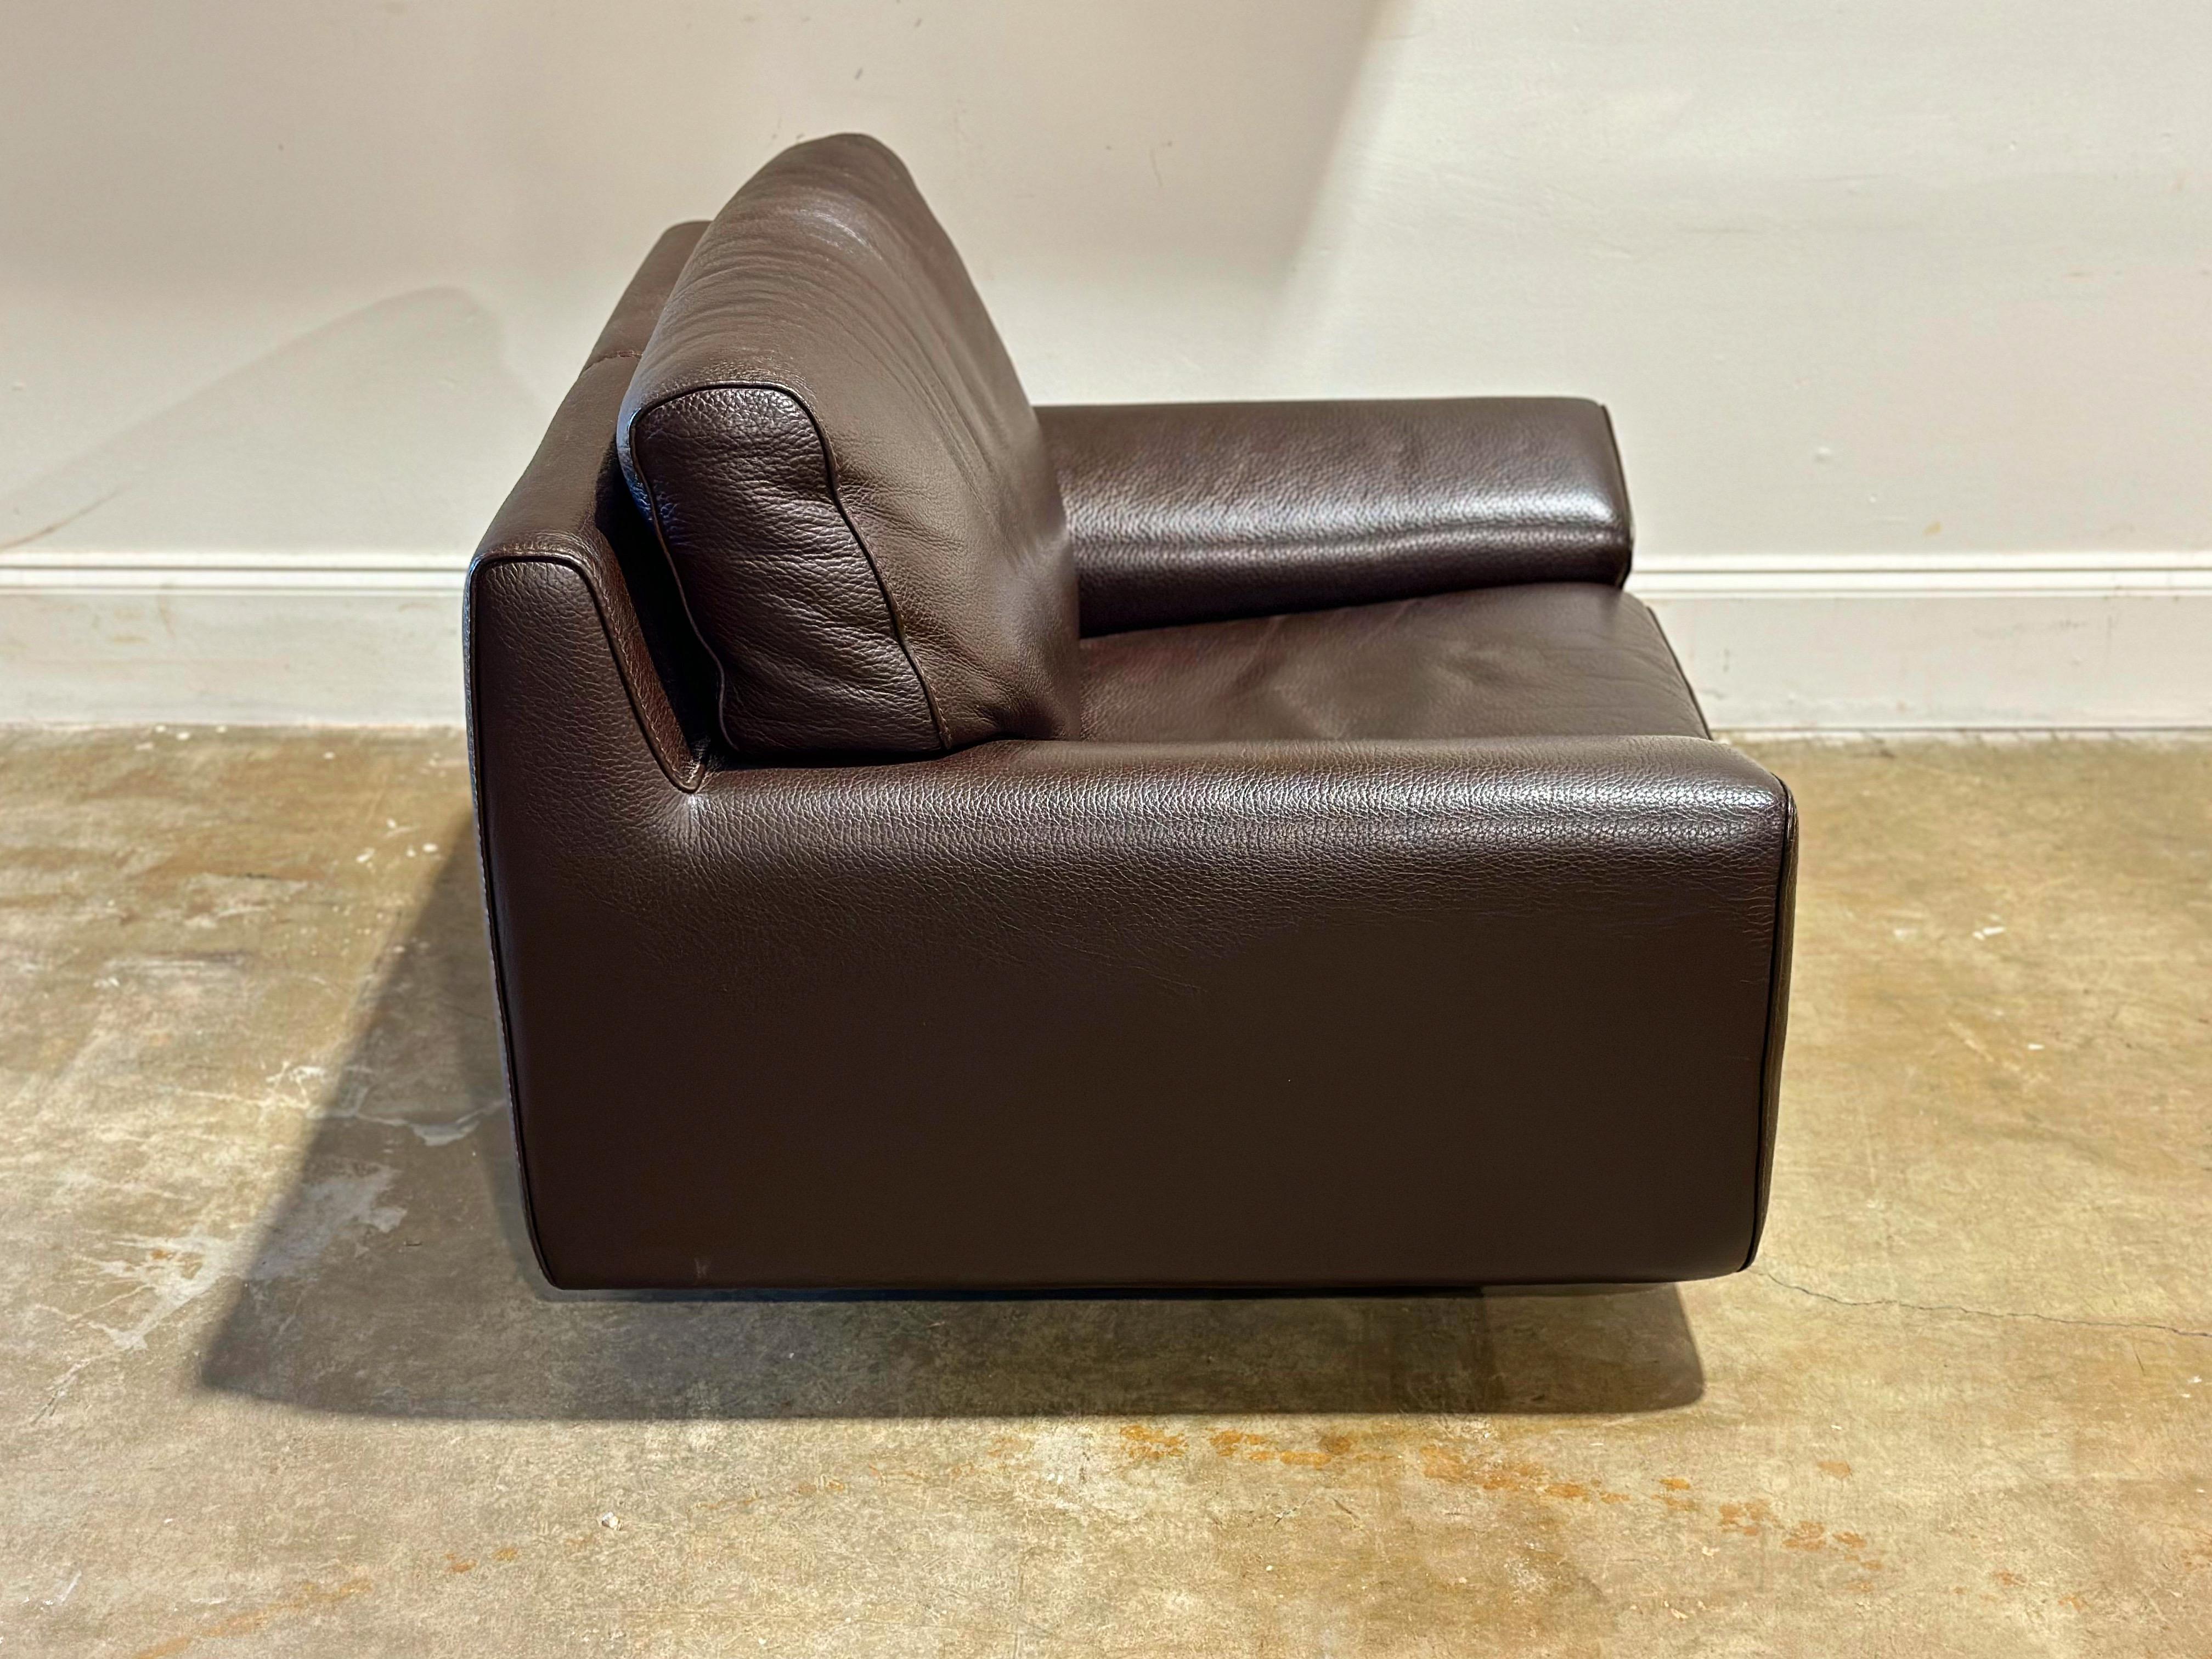 Stellar vintage leather swivel lounge chair by Roche Bobois, France circa late 1980s. Striking silhouette and opulent comfort. The full grain dark ox blood brown leather has aged to perfection. 

Excellent original condition with no flaws of note.